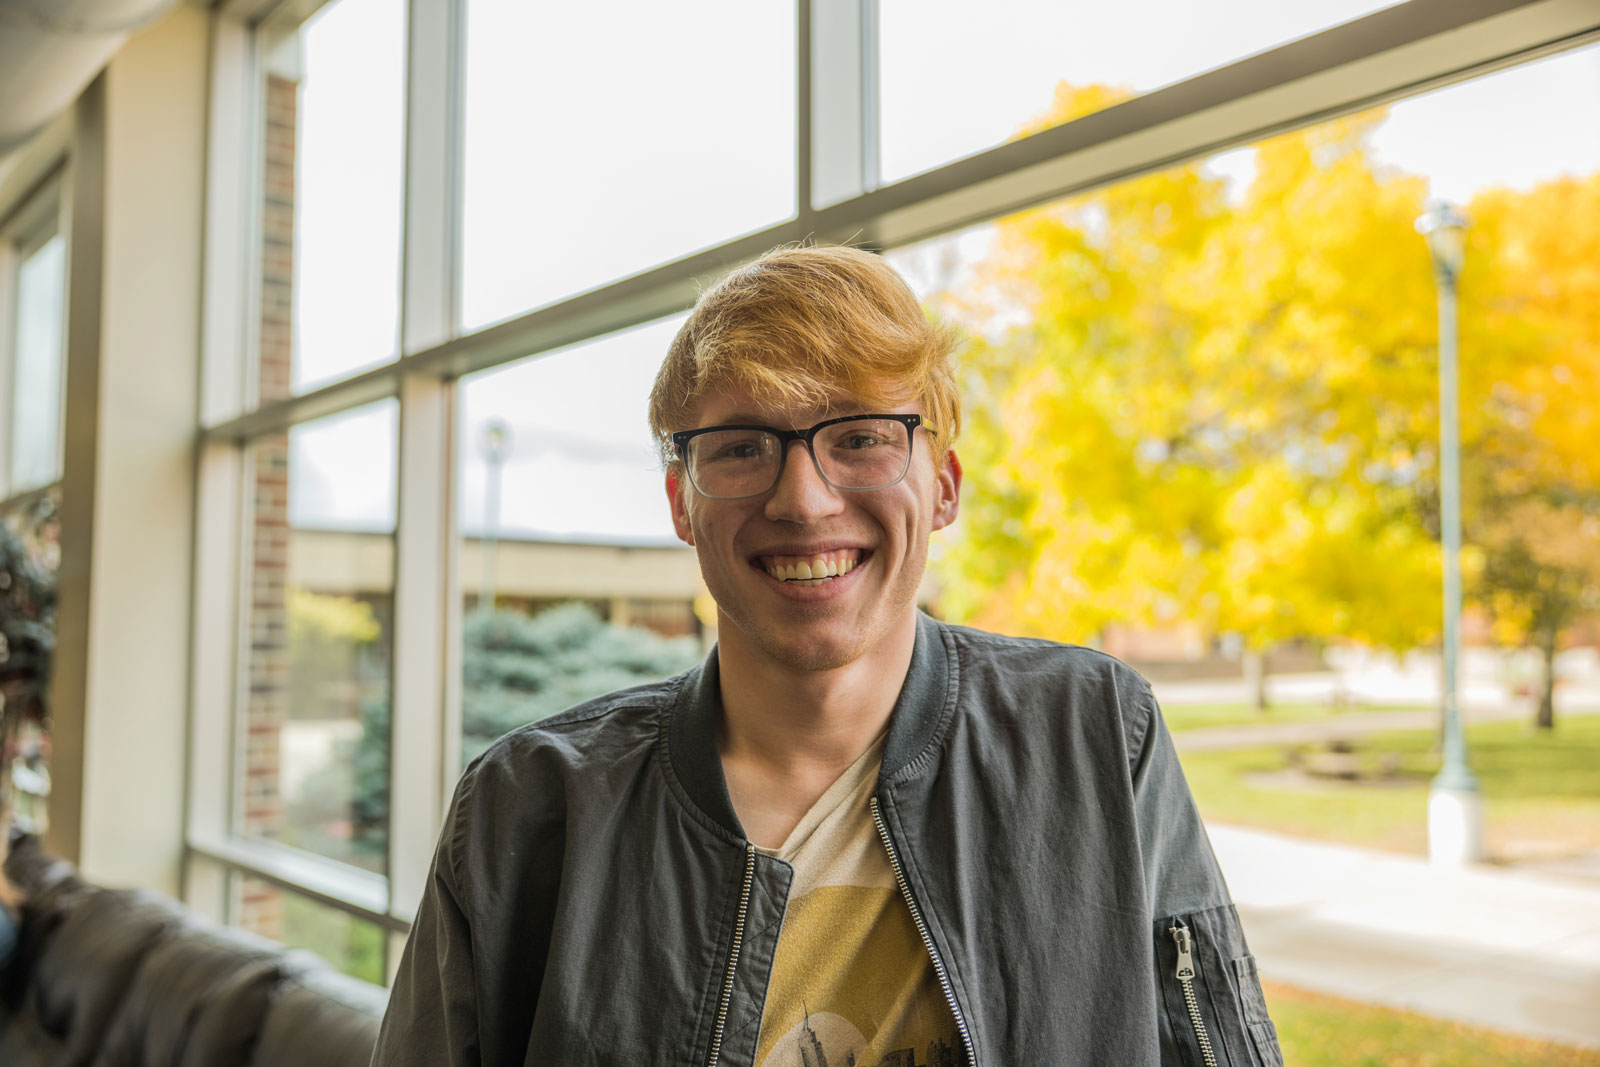 Samuel Lund was elected Student Association President for 2023-24